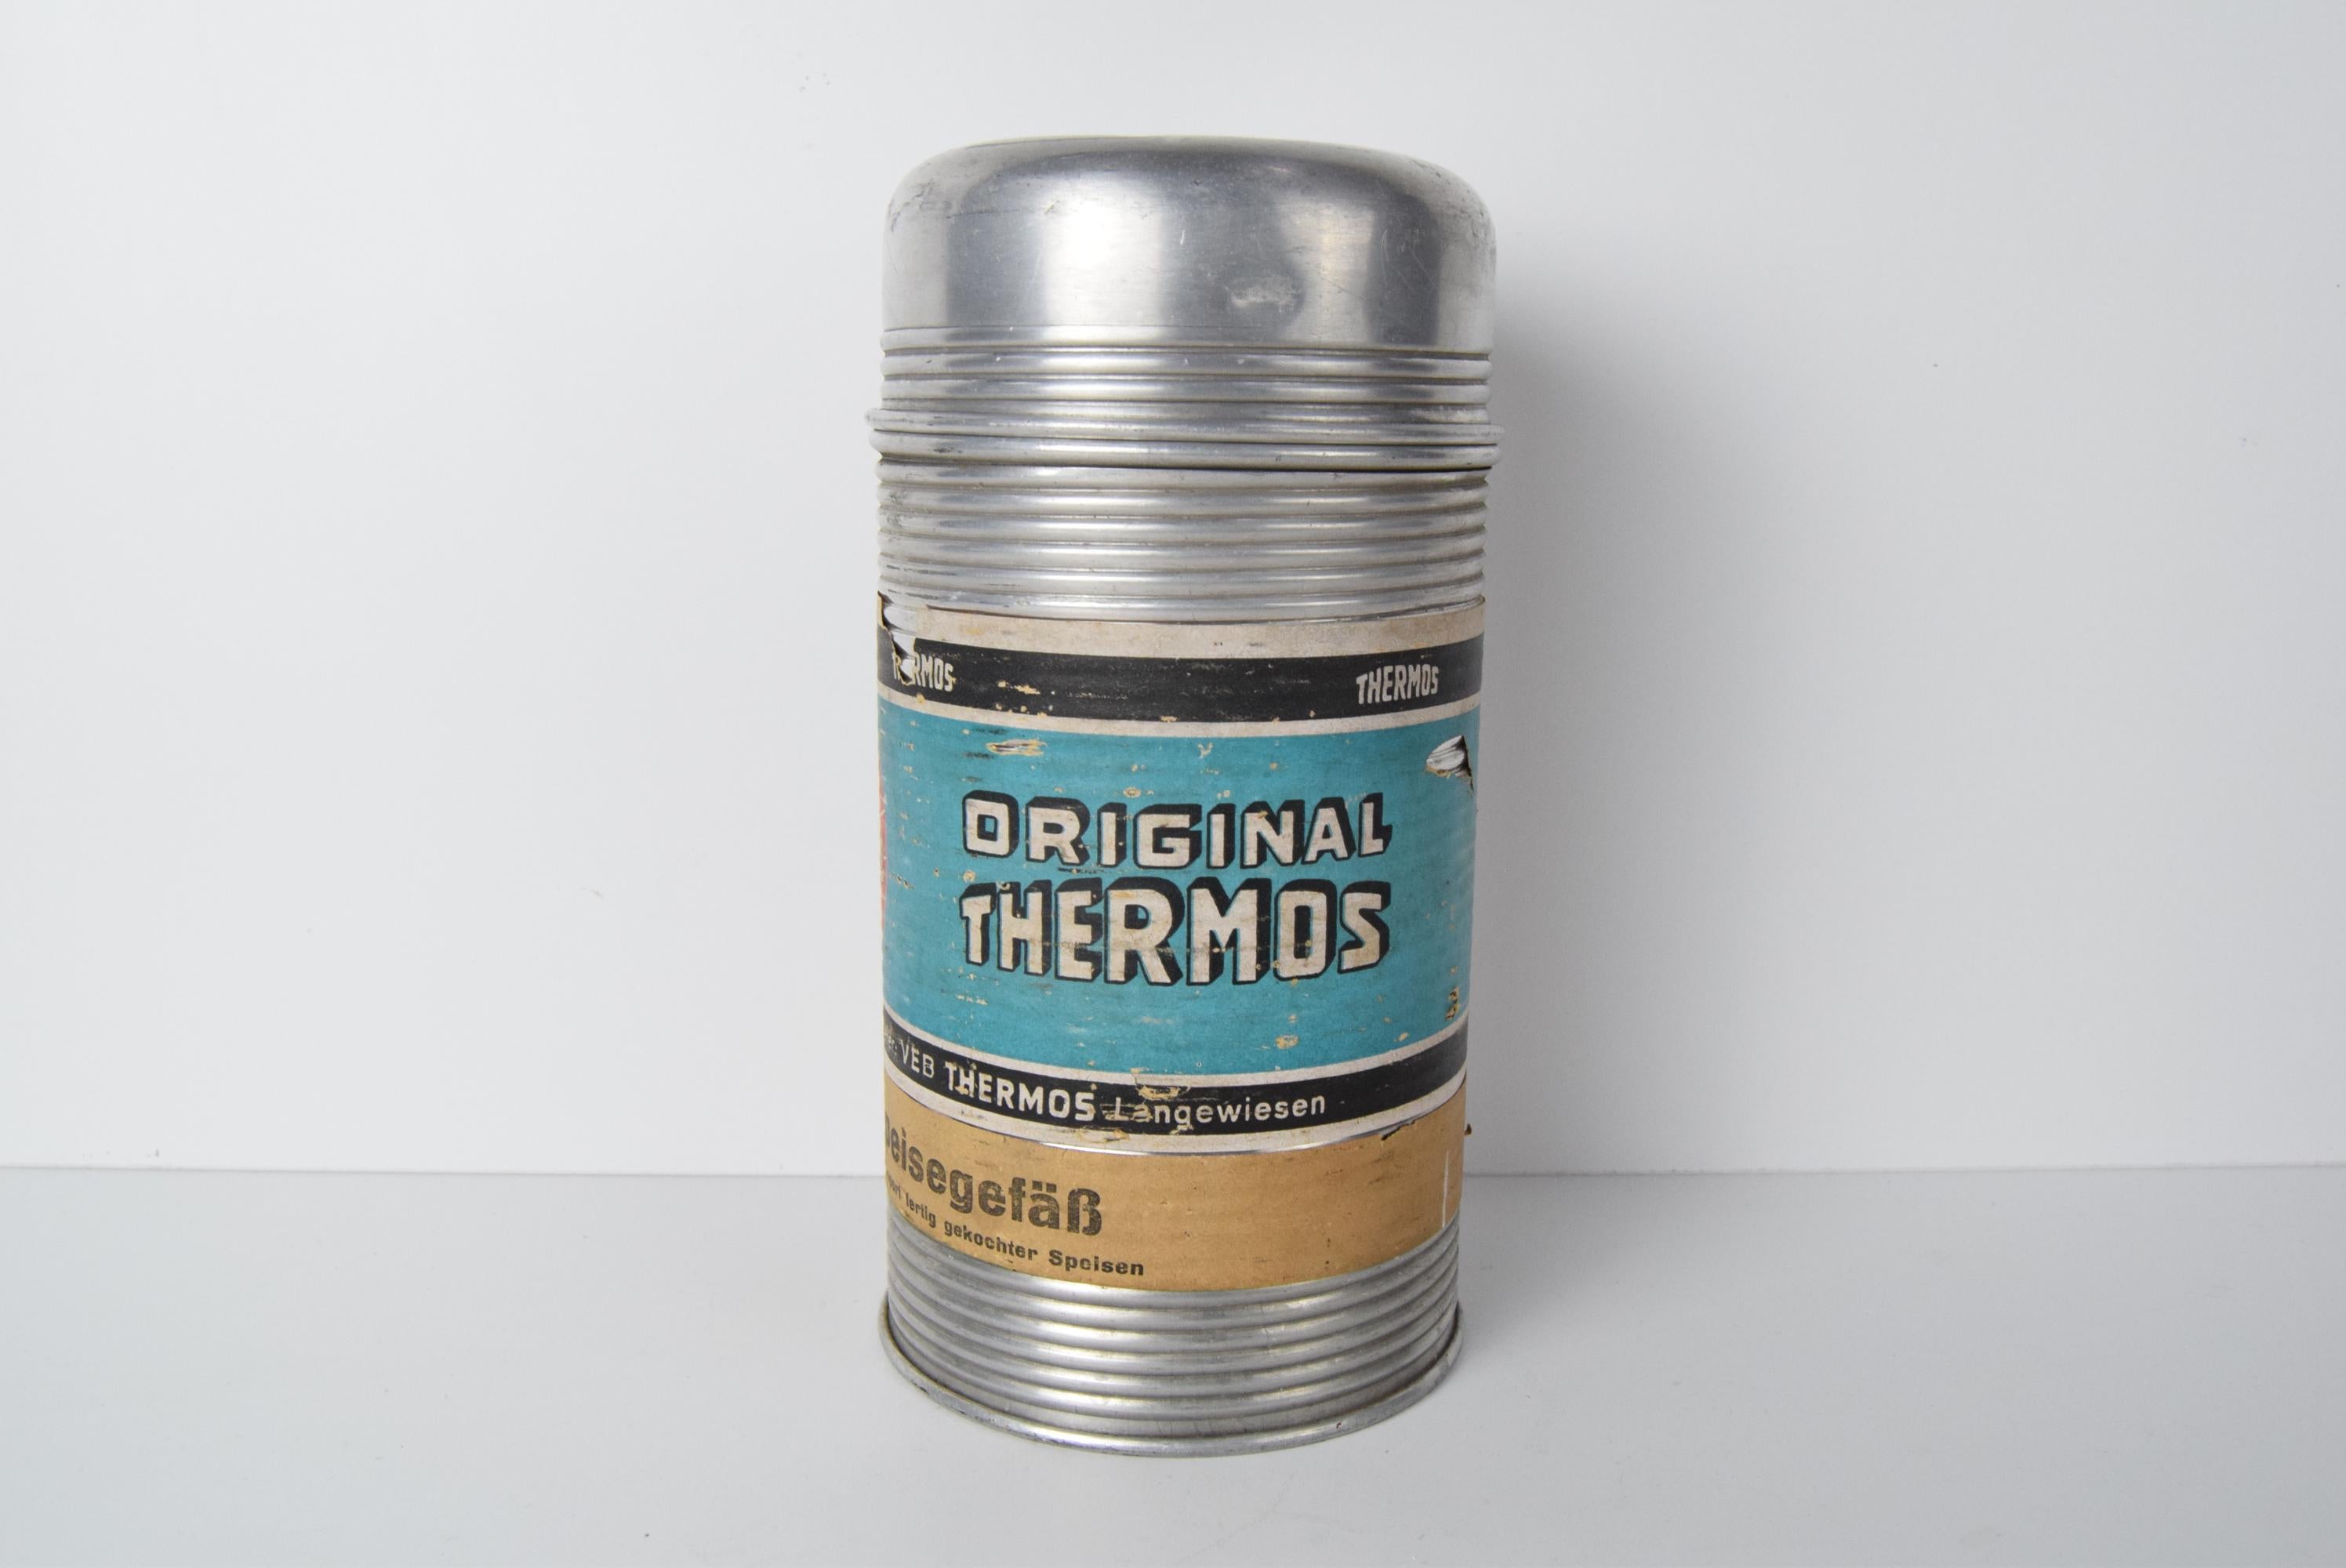 
Made in Germany
Made of Aluminum,Glass,Cork
The thermos has the original label
The aluminum surface shows signs of use, it is wrinkled, the inner part is undamaged
fully functional
Original condition